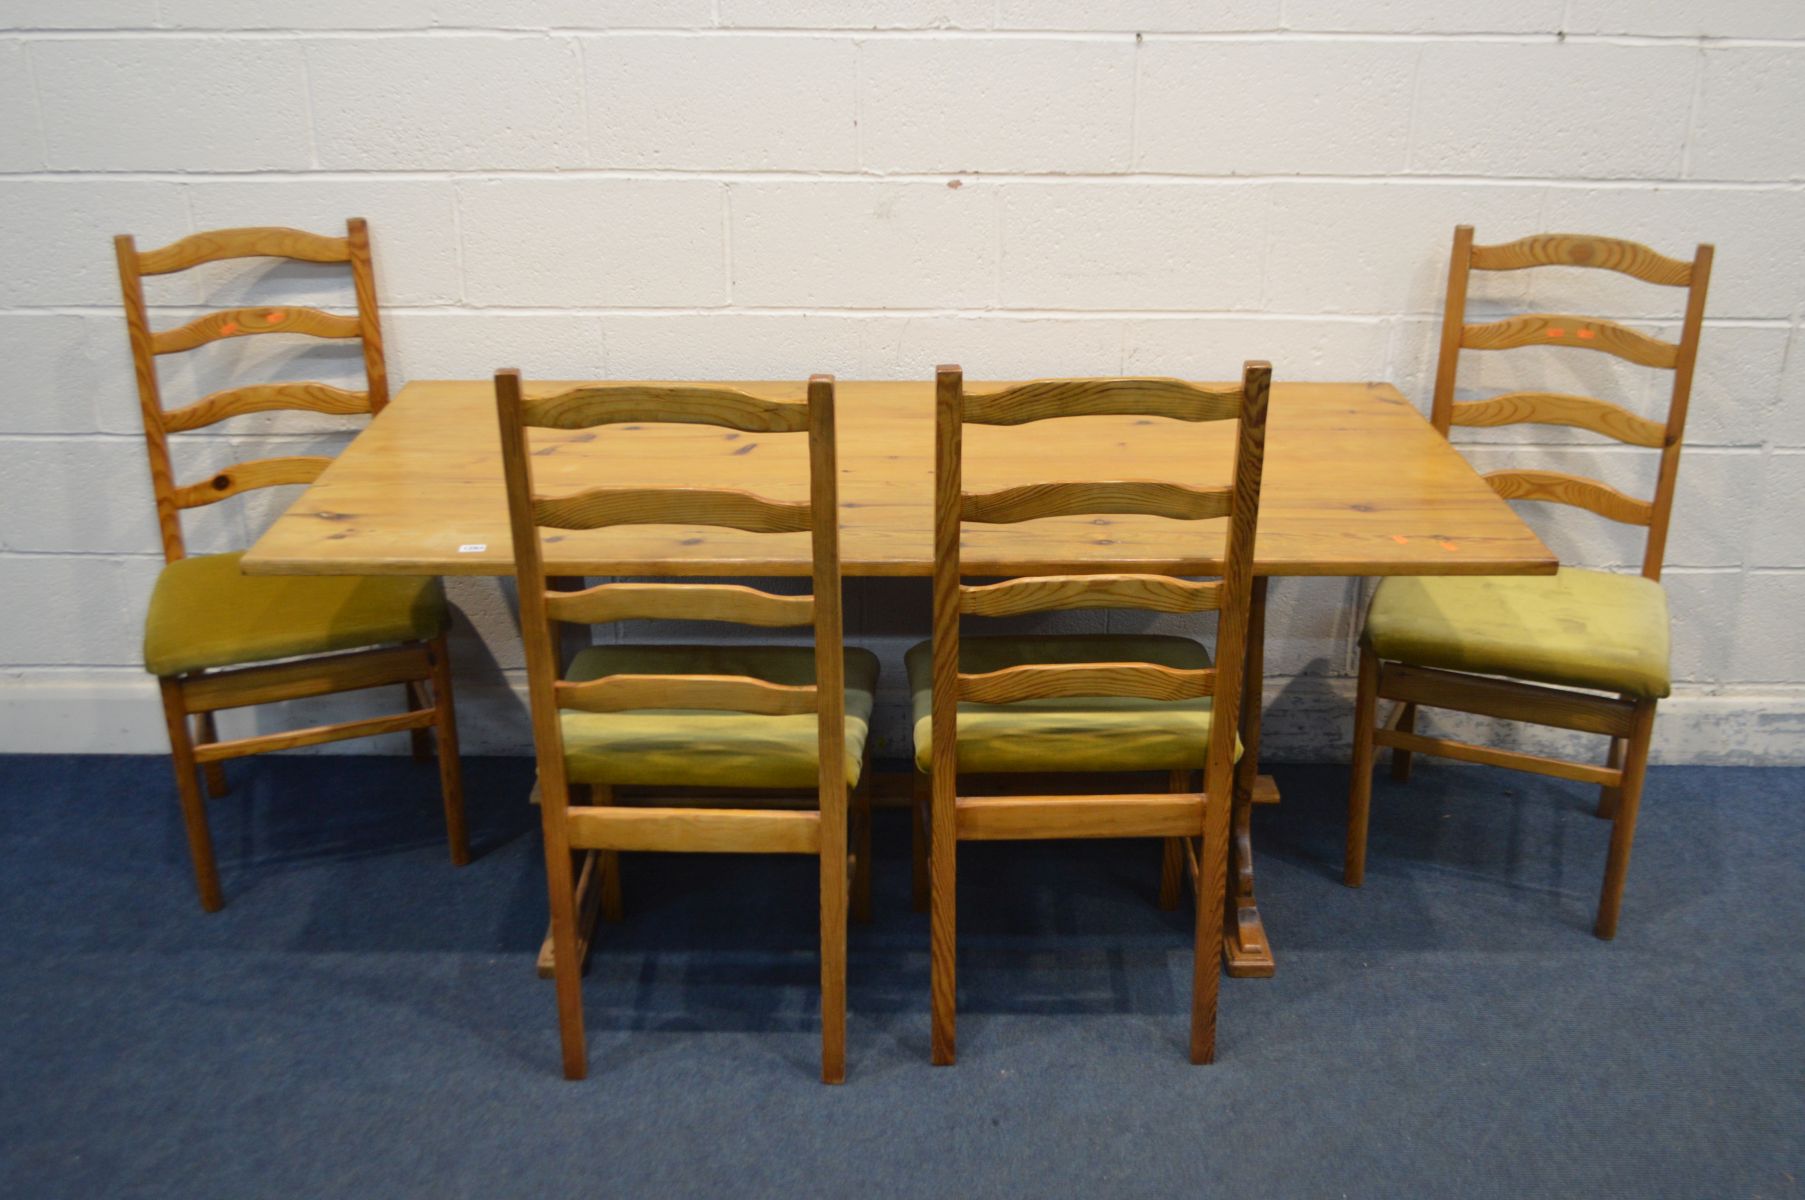 A PINE KITCHEN TABLE, length 168cm x depth 84cm x height 74cm and four ladderback chairs (5)